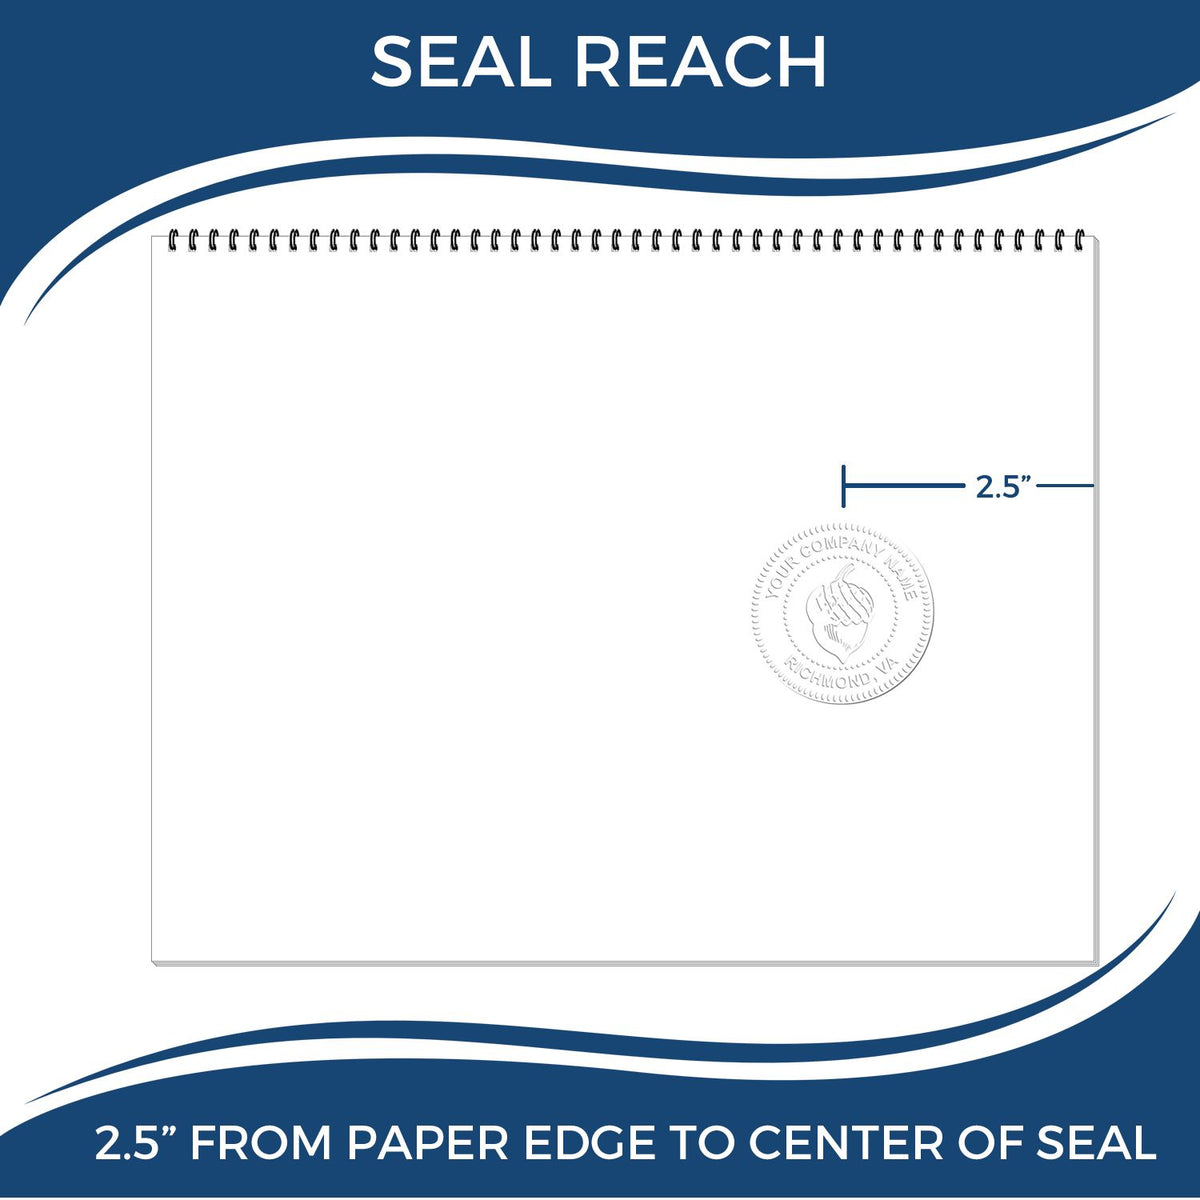 An infographic showing the seal reach which is represented by a ruler and a miniature seal image of the Heavy Duty Cast Iron Kansas Geologist Seal Embosser